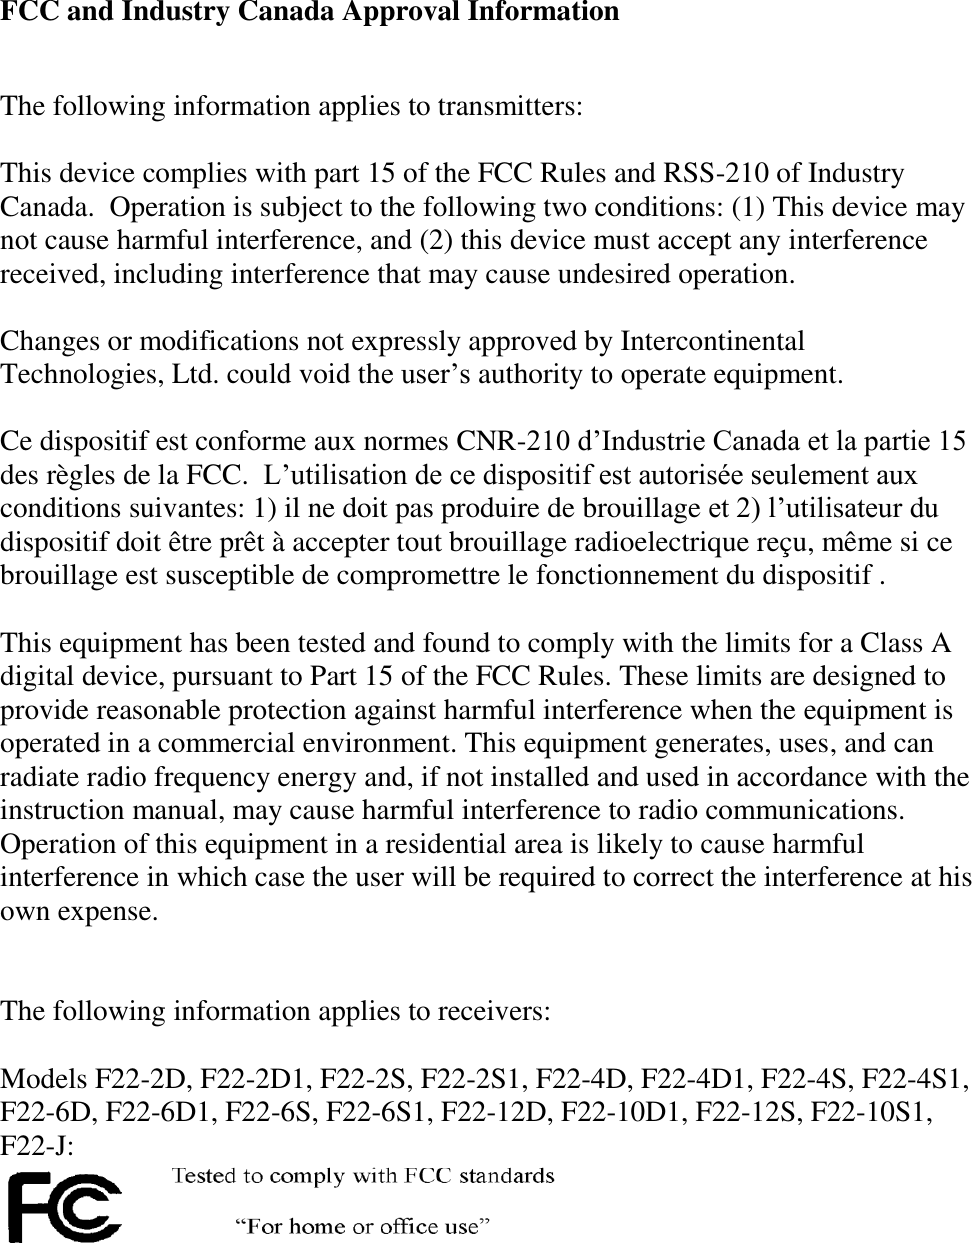 FCC and Industry Canada Approval Information   The following information applies to transmitters:  This device complies with part 15 of the FCC Rules and RSS-210 of Industry Canada.  Operation is subject to the following two conditions: (1) This device may not cause harmful interference, and (2) this device must accept any interference received, including interference that may cause undesired operation.   Changes or modifications not expressly approved by Intercontinental Technologies, Ltd. could void the user’s authority to operate equipment.  Ce dispositif est conforme aux normes CNR-210 d’Industrie Canada et la partie 15 des règles de la FCC.  L’utilisation de ce dispositif est autorisée seulement aux conditions suivantes: 1) il ne doit pas produire de brouillage et 2) l’utilisateur du dispositif doit être prêt à accepter tout brouillage radioelectrique reçu, même si ce brouillage est susceptible de compromettre le fonctionnement du dispositif .  This equipment has been tested and found to comply with the limits for a Class A digital device, pursuant to Part 15 of the FCC Rules. These limits are designed to provide reasonable protection against harmful interference when the equipment is operated in a commercial environment. This equipment generates, uses, and can radiate radio frequency energy and, if not installed and used in accordance with the instruction manual, may cause harmful interference to radio communications. Operation of this equipment in a residential area is likely to cause harmful interference in which case the user will be required to correct the interference at his own expense.    The following information applies to receivers:  Models F22-2D, F22-2D1, F22-2S, F22-2S1, F22-4D, F22-4D1, F22-4S, F22-4S1, F22-6D, F22-6D1, F22-6S, F22-6S1, F22-12D, F22-10D1, F22-12S, F22-10S1, F22-J:  